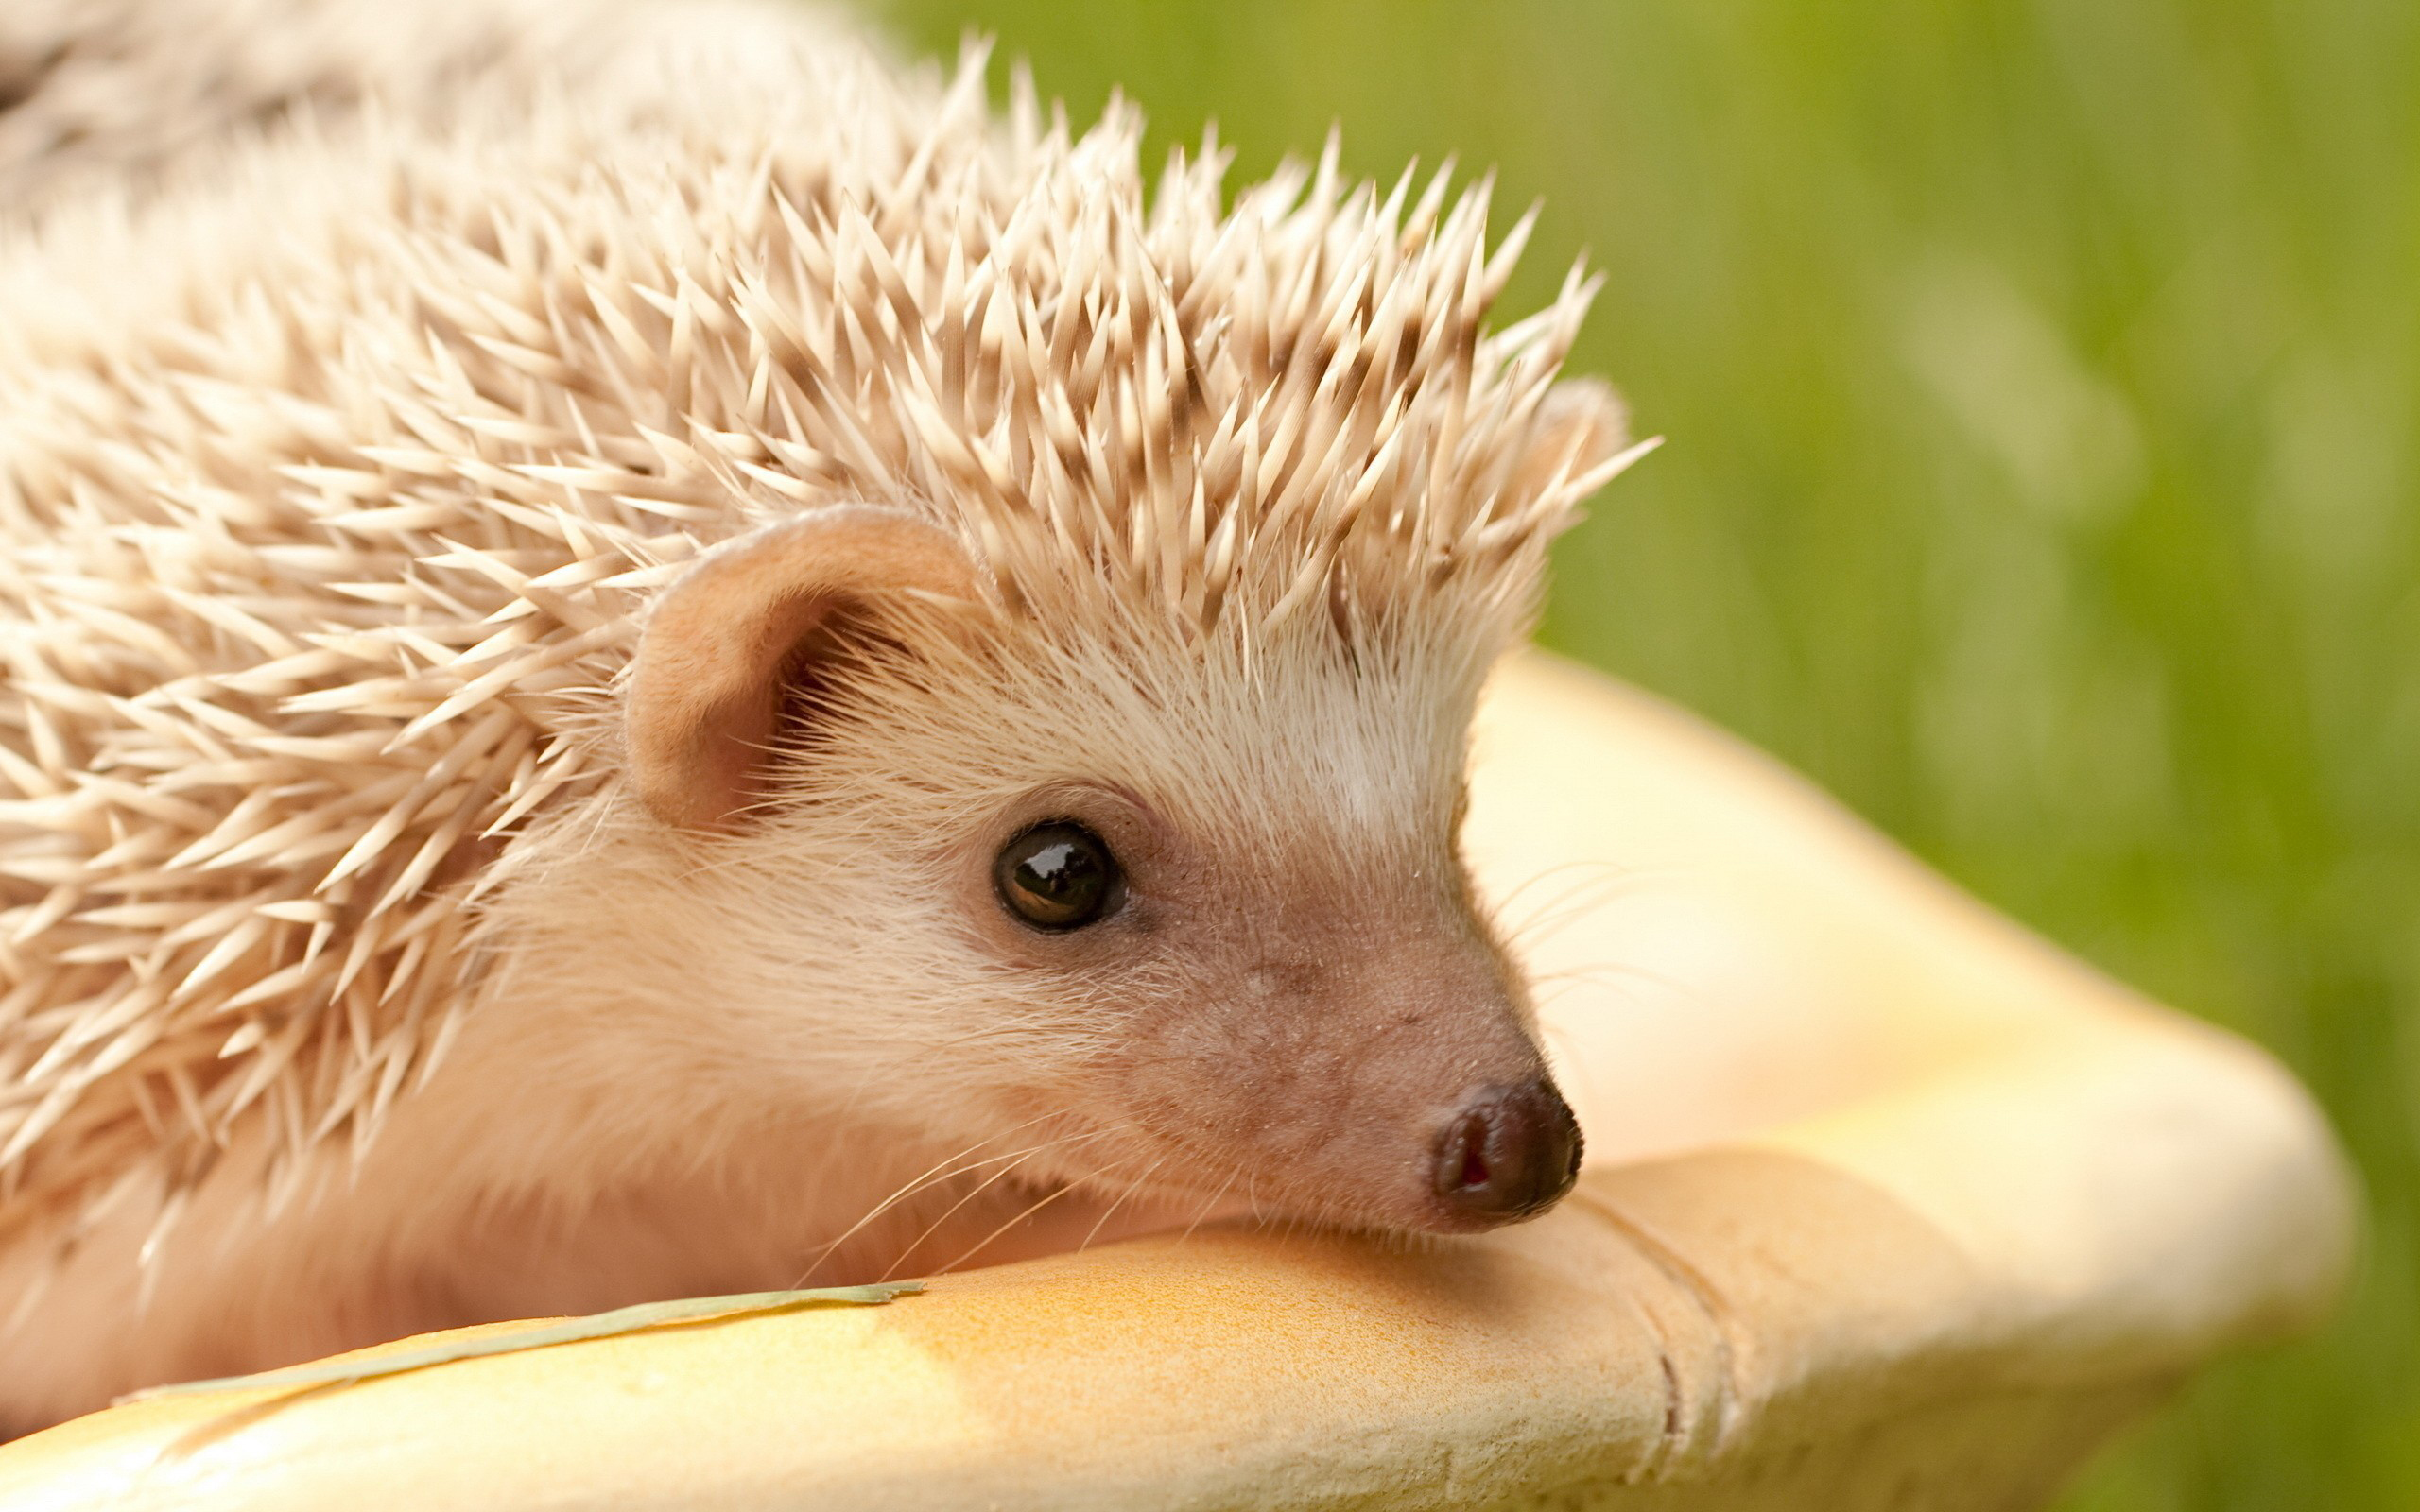 42965 download wallpaper animals, hedgehogs, orange screensavers and pictures for free